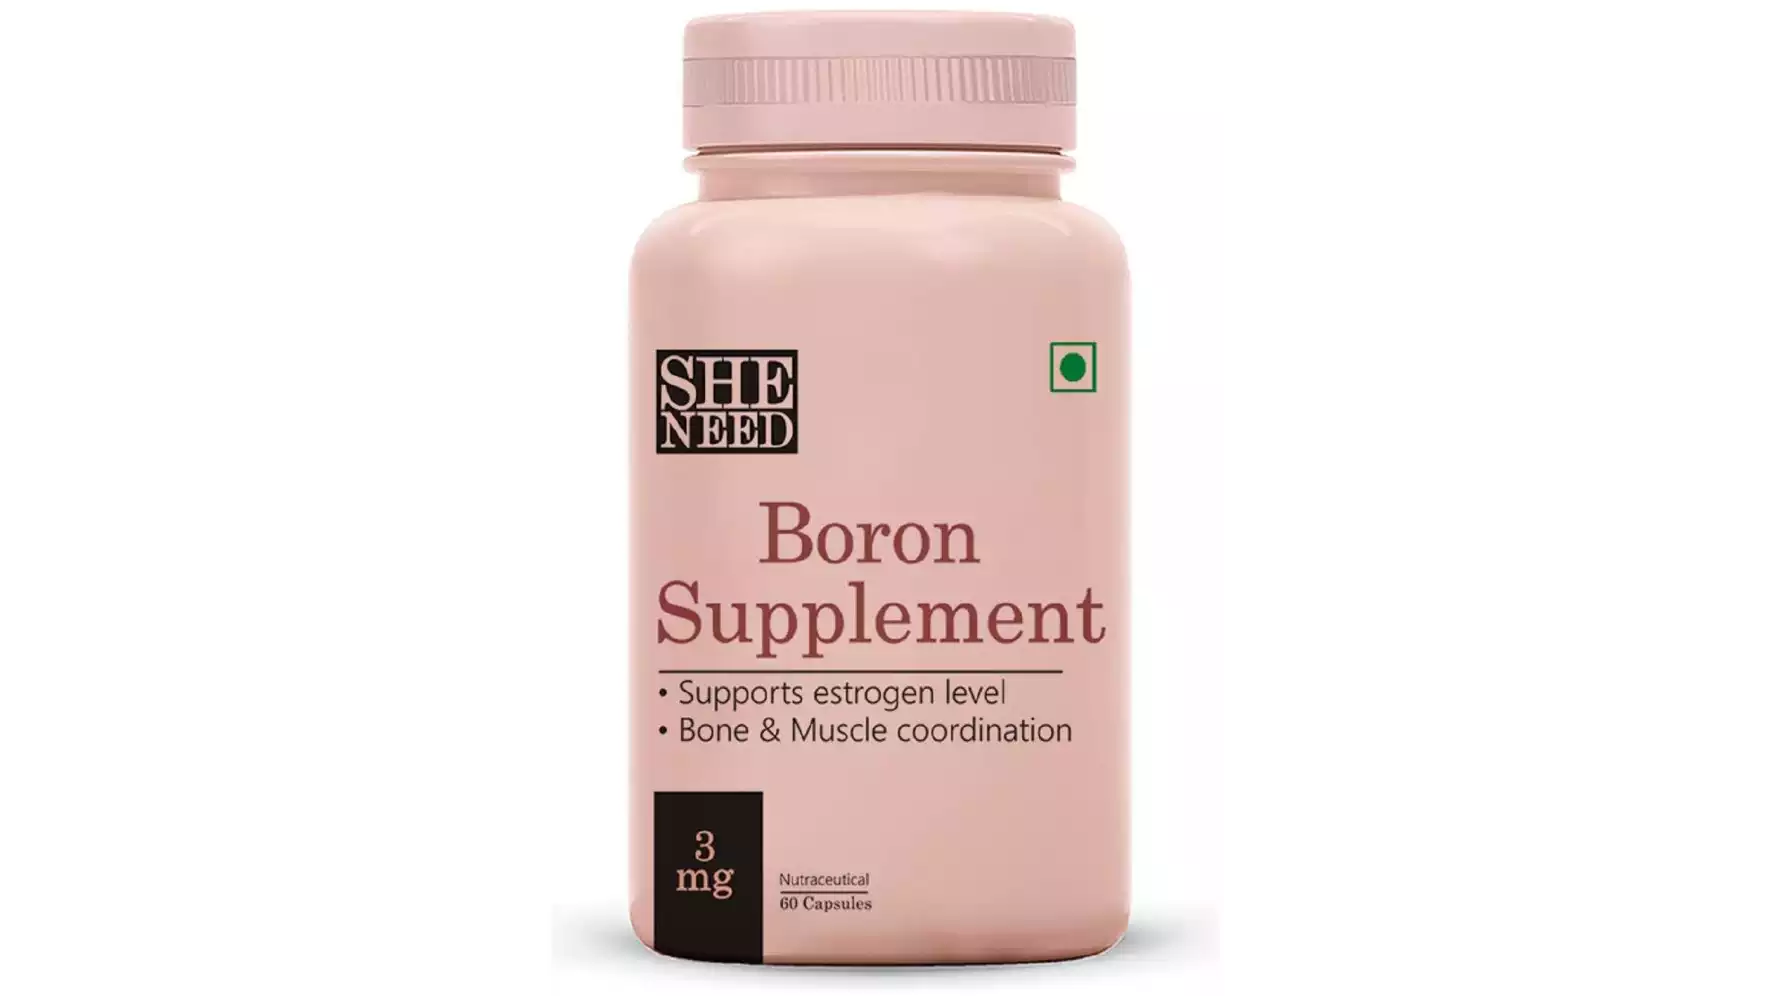 SheNeed Boron Supplements For Women (3Mg) Capsules (60caps)